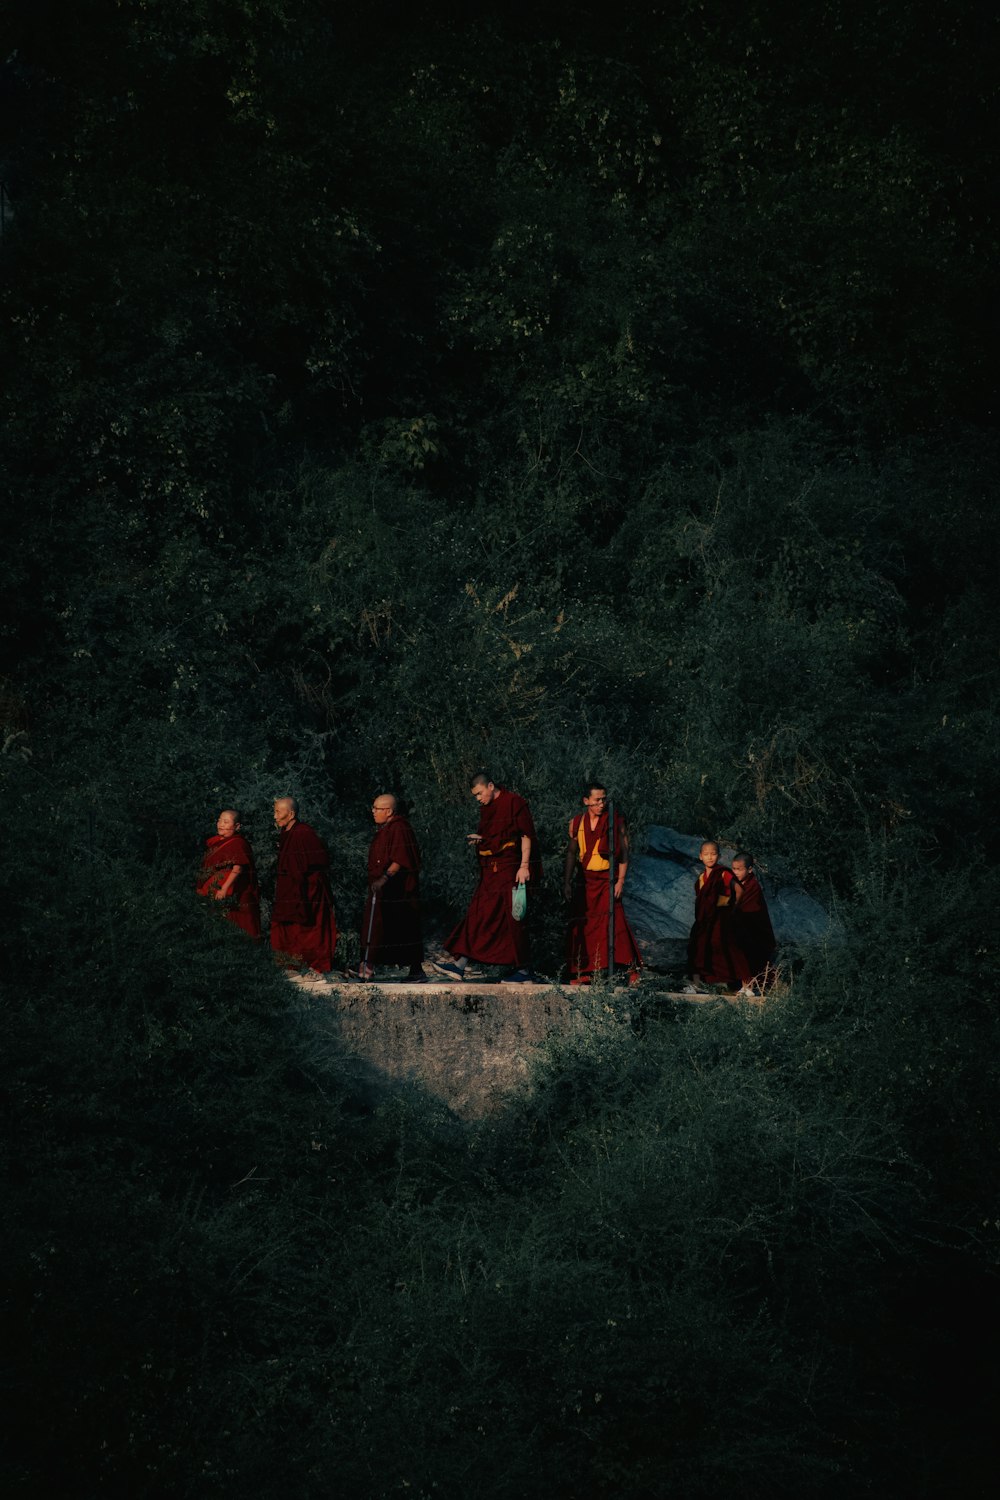 a group of people in red robes standing on a boat